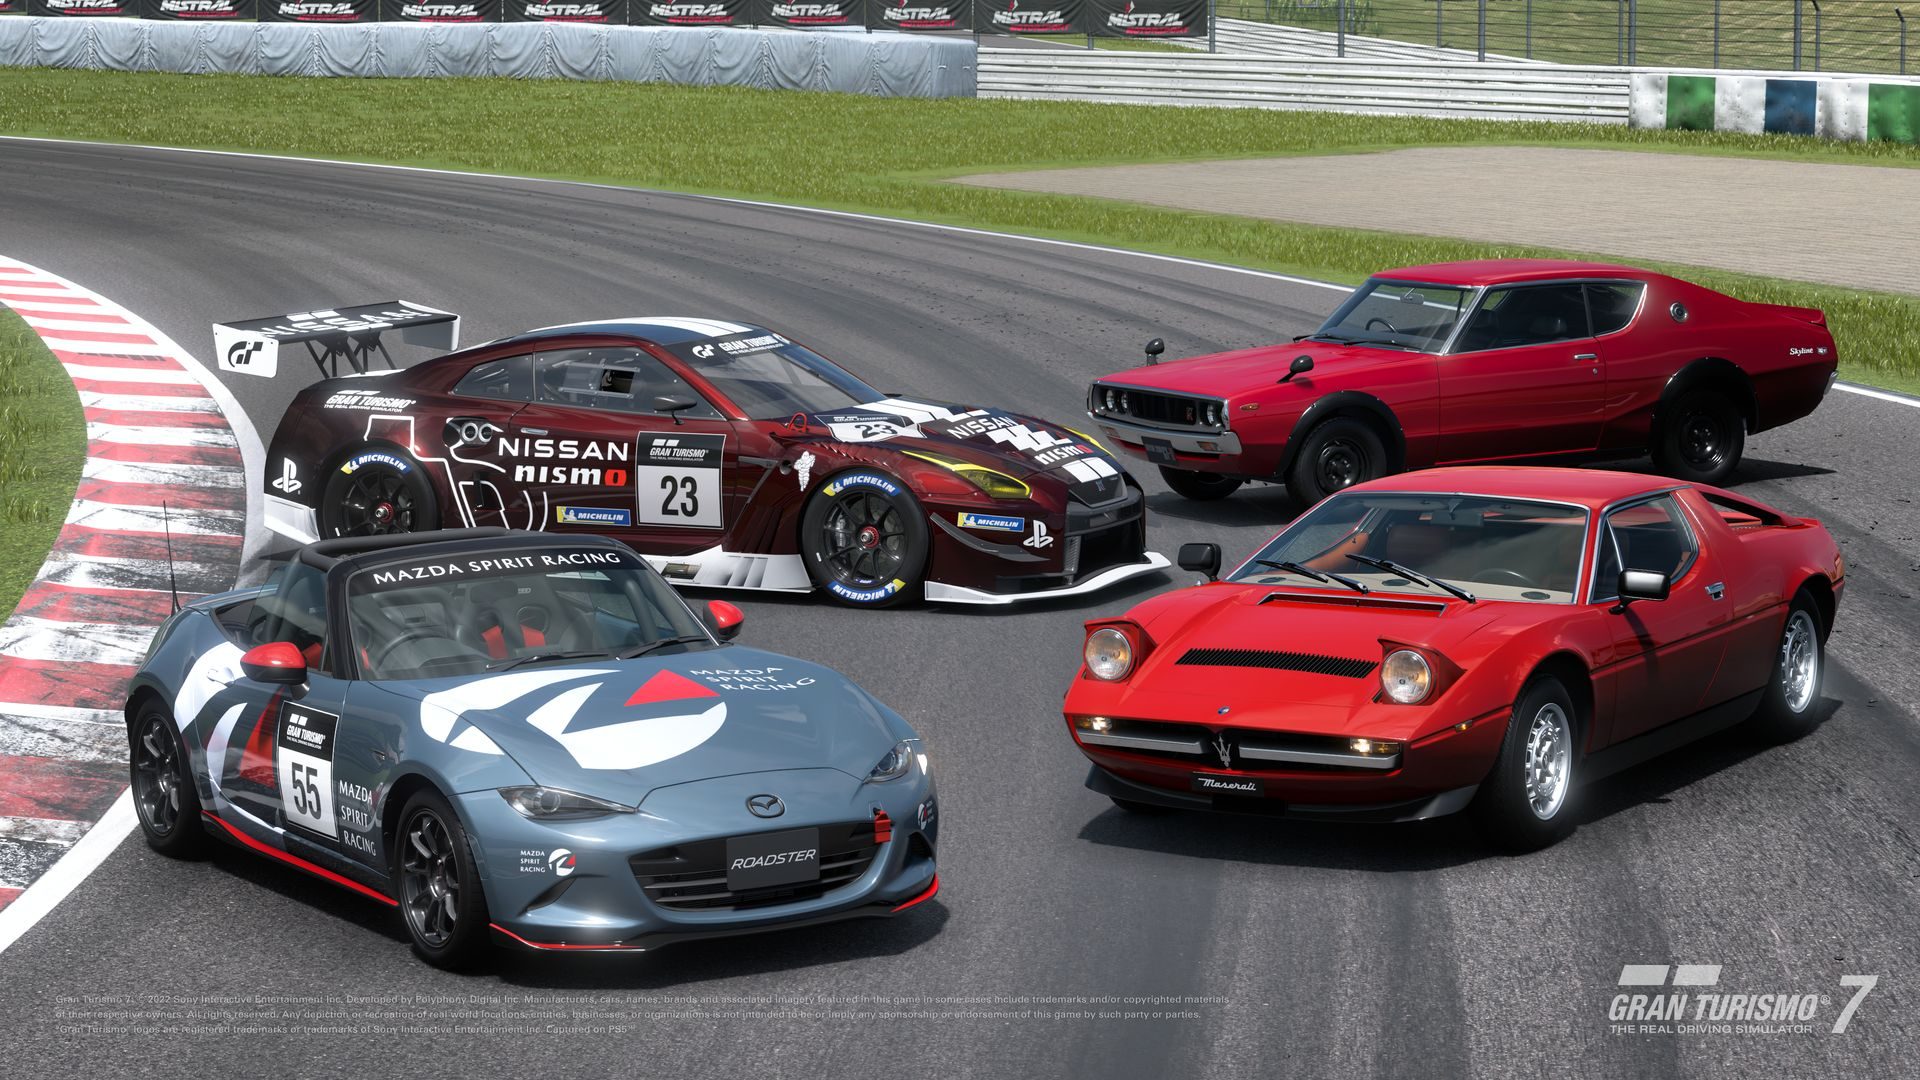 Get an early preview of the cars racing into Gran Turismo 7 later today